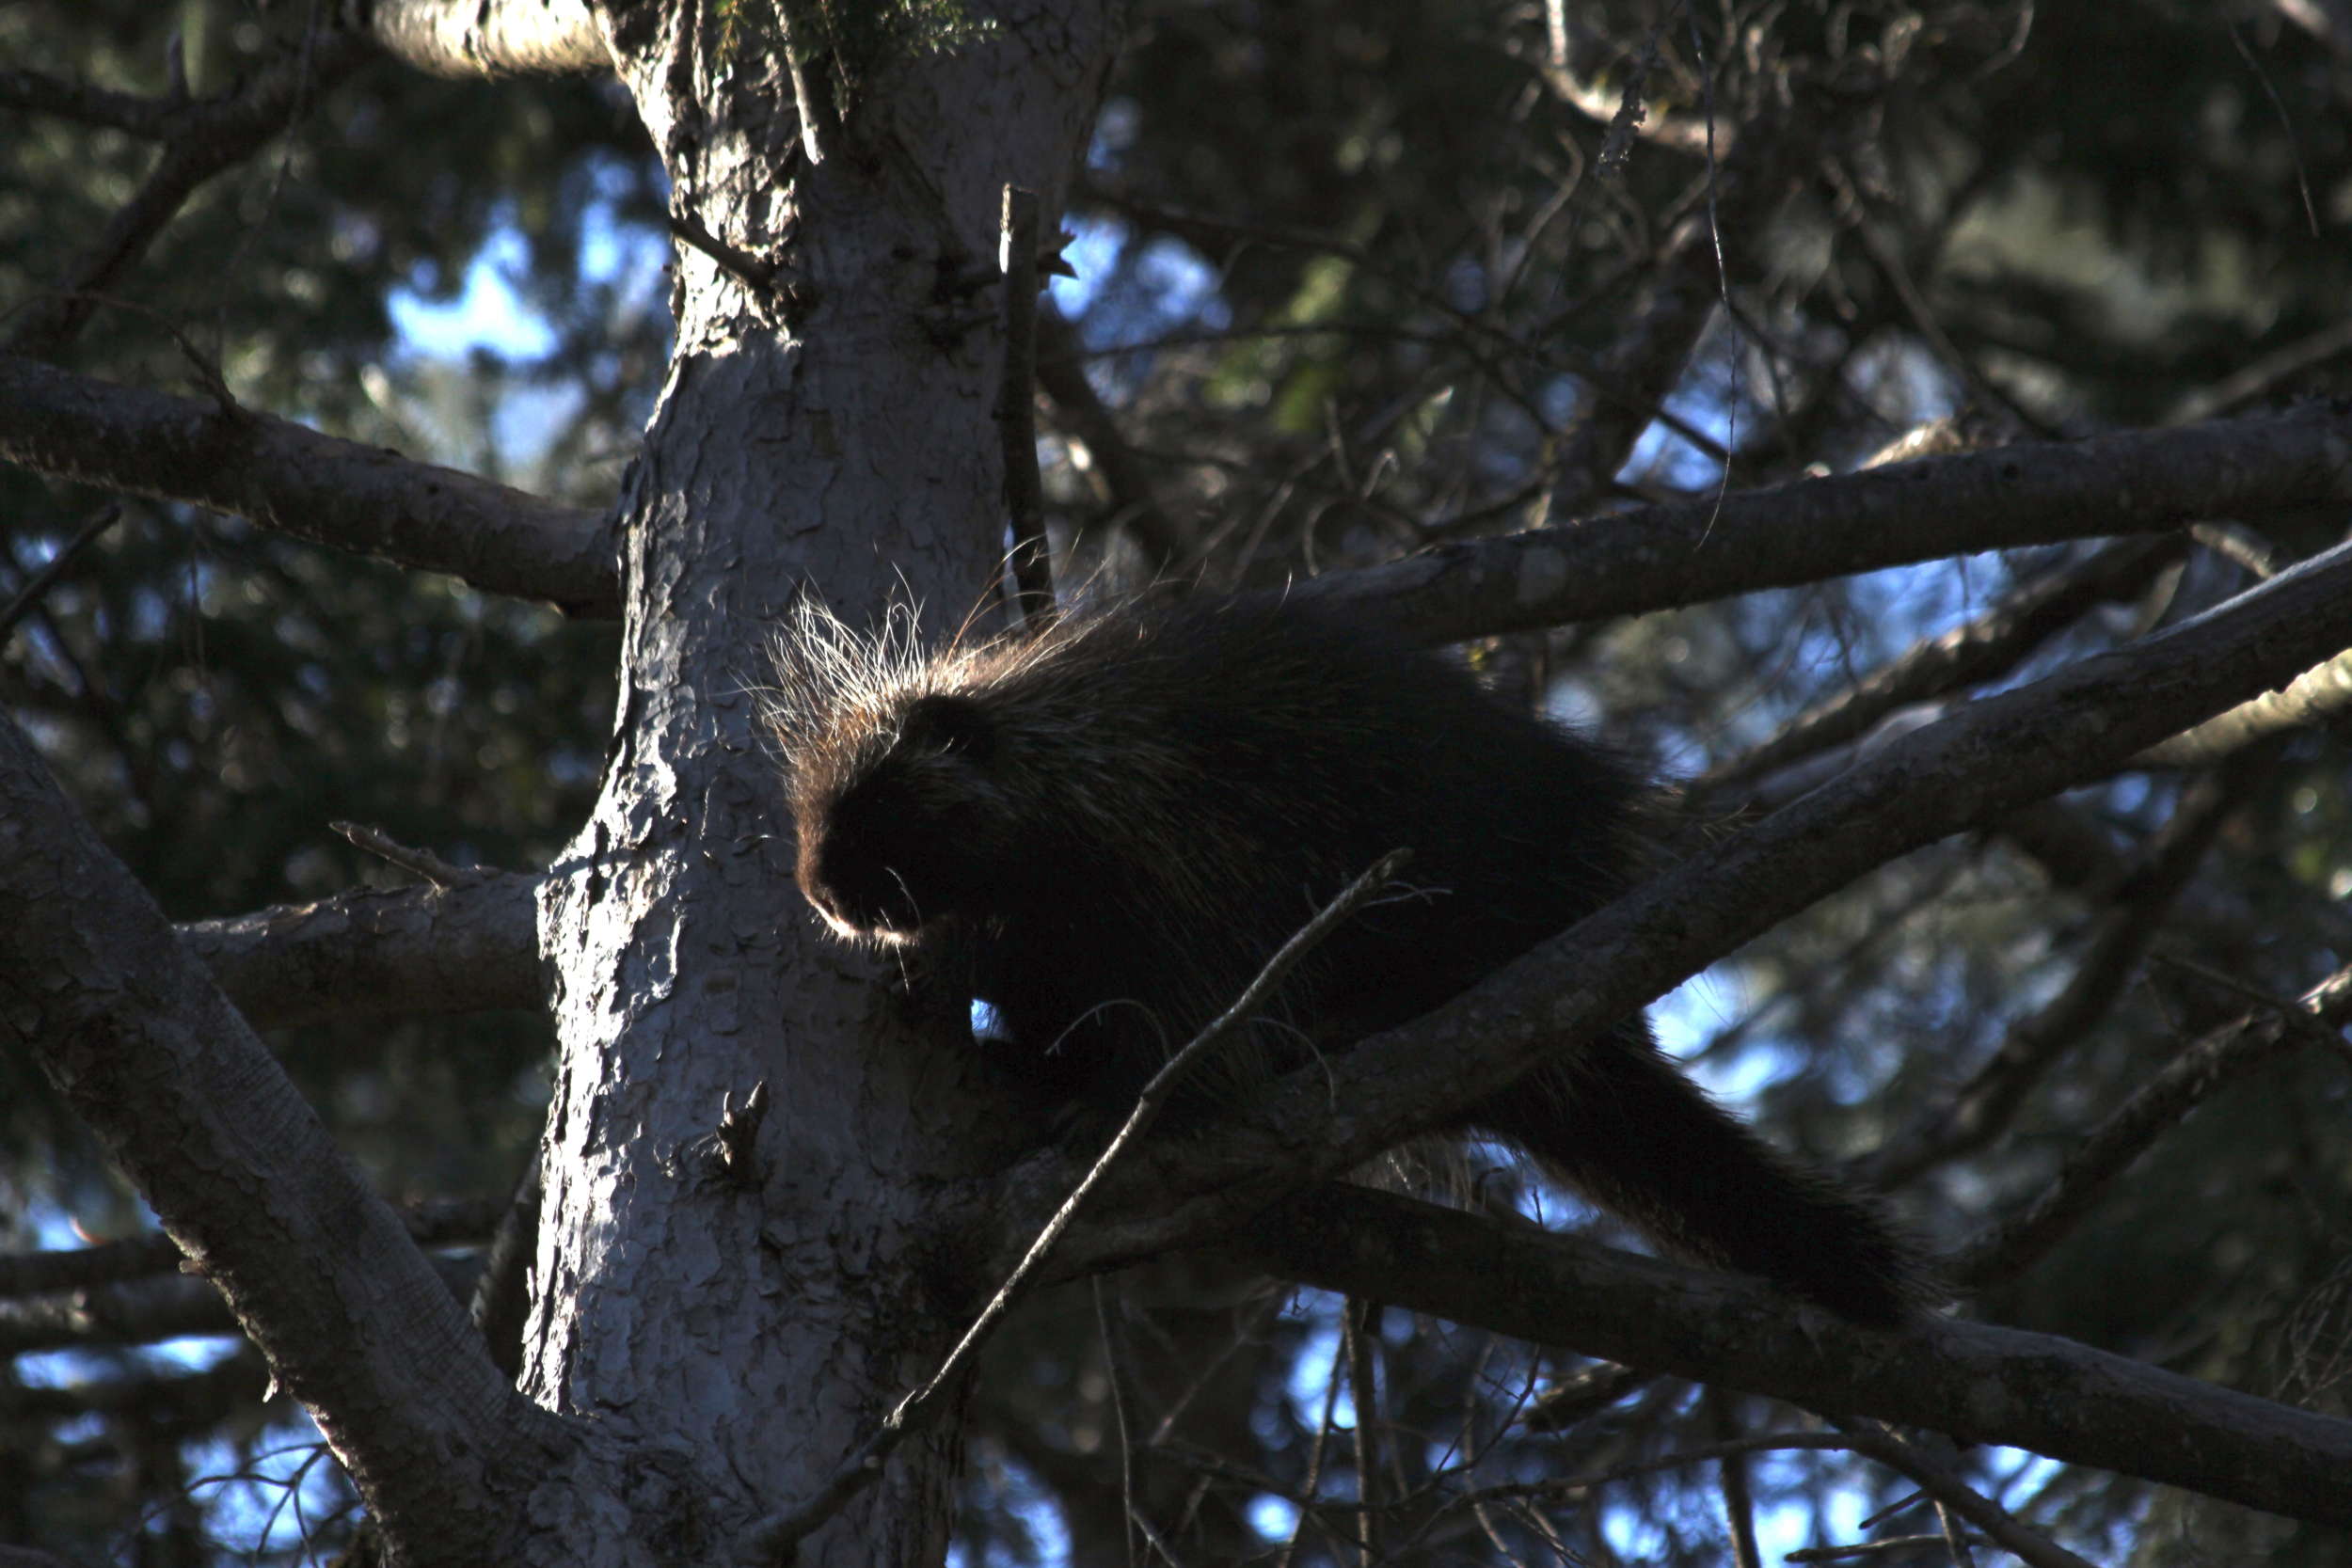 a porcupine peeks into the sun from a shadowy tree branch